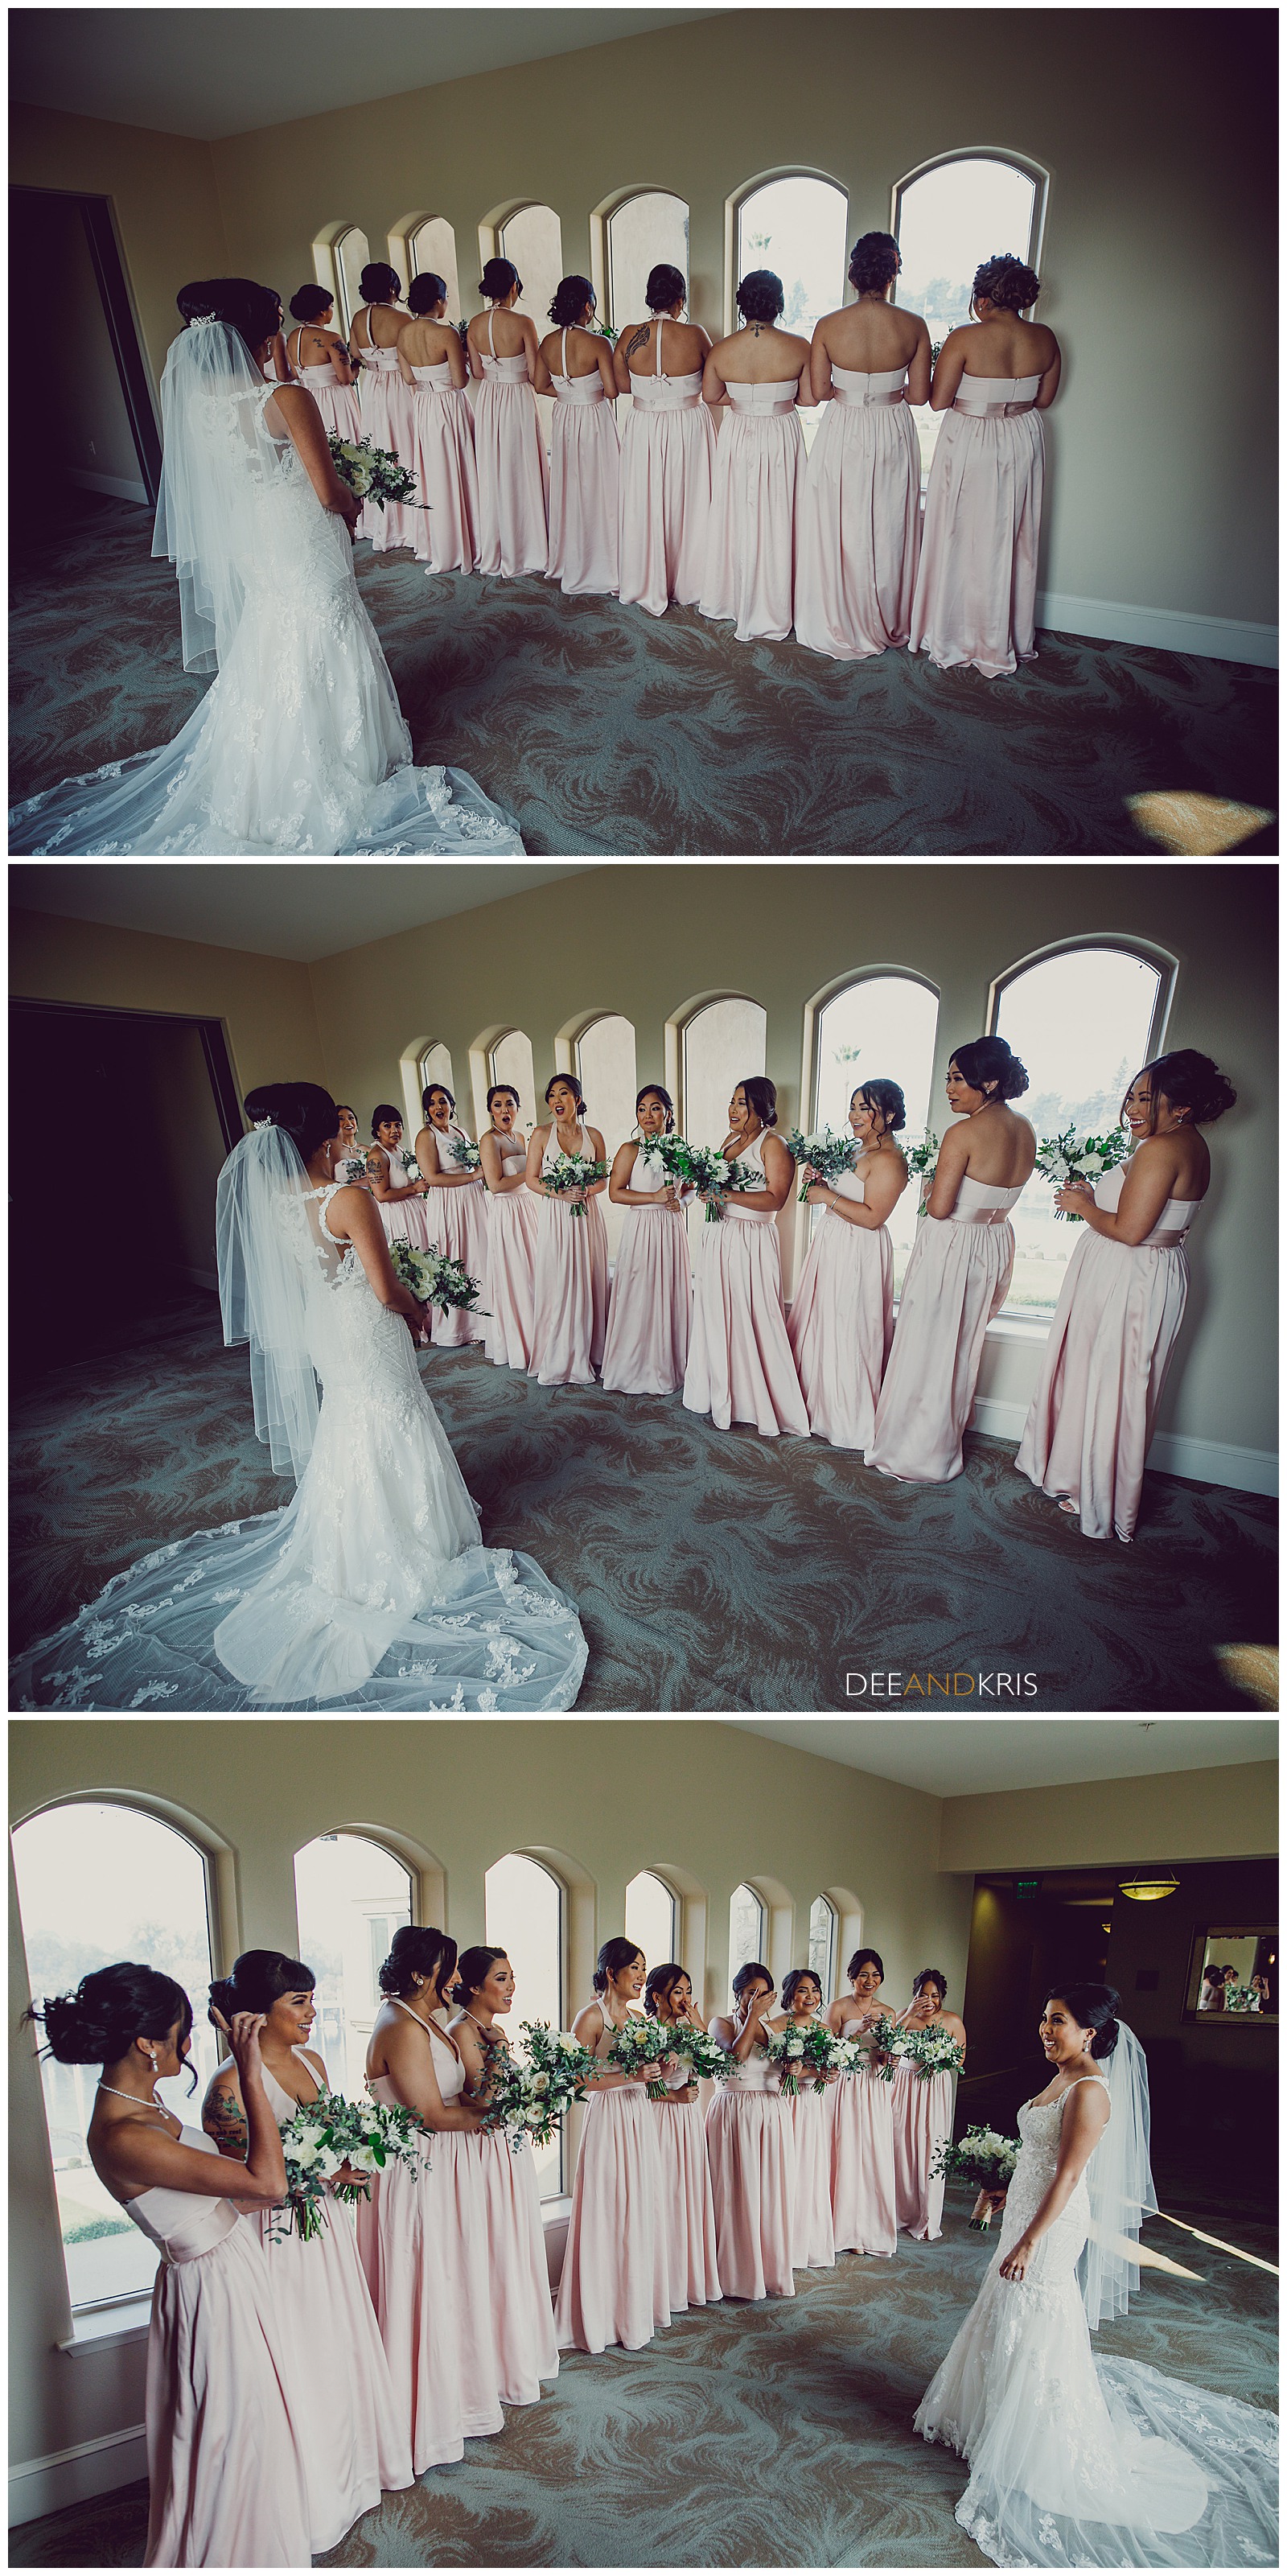 Bridesmaid first look at your wedding